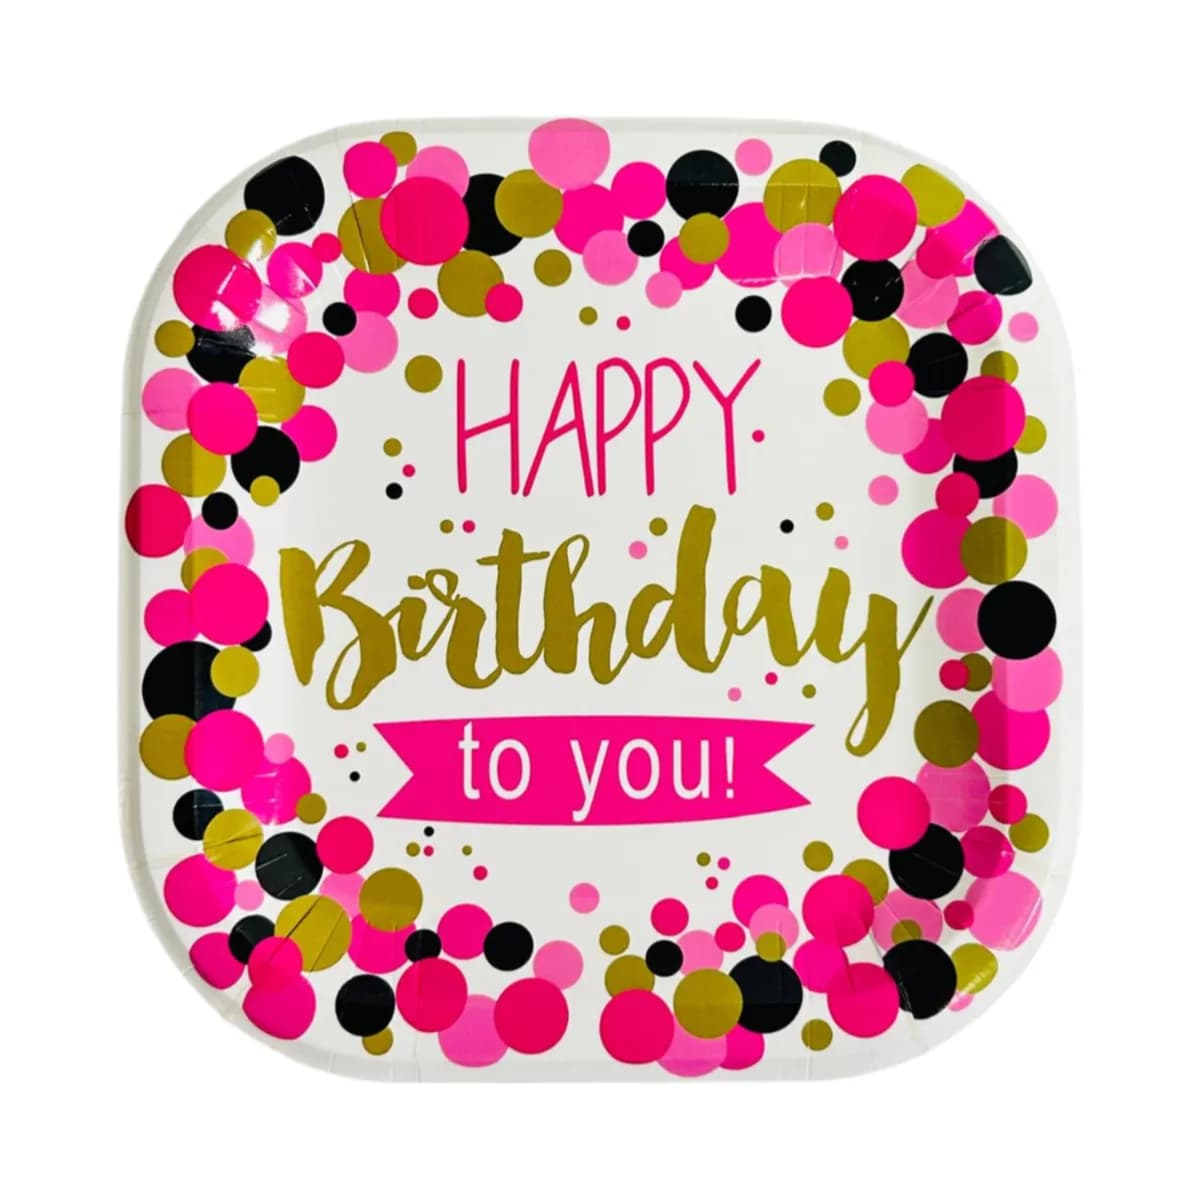 Happy Birthday Themed Birthday Party  Disposable Plates-Pack Of 6 Pieces-Small Size - (Pink) - (PIGC212)